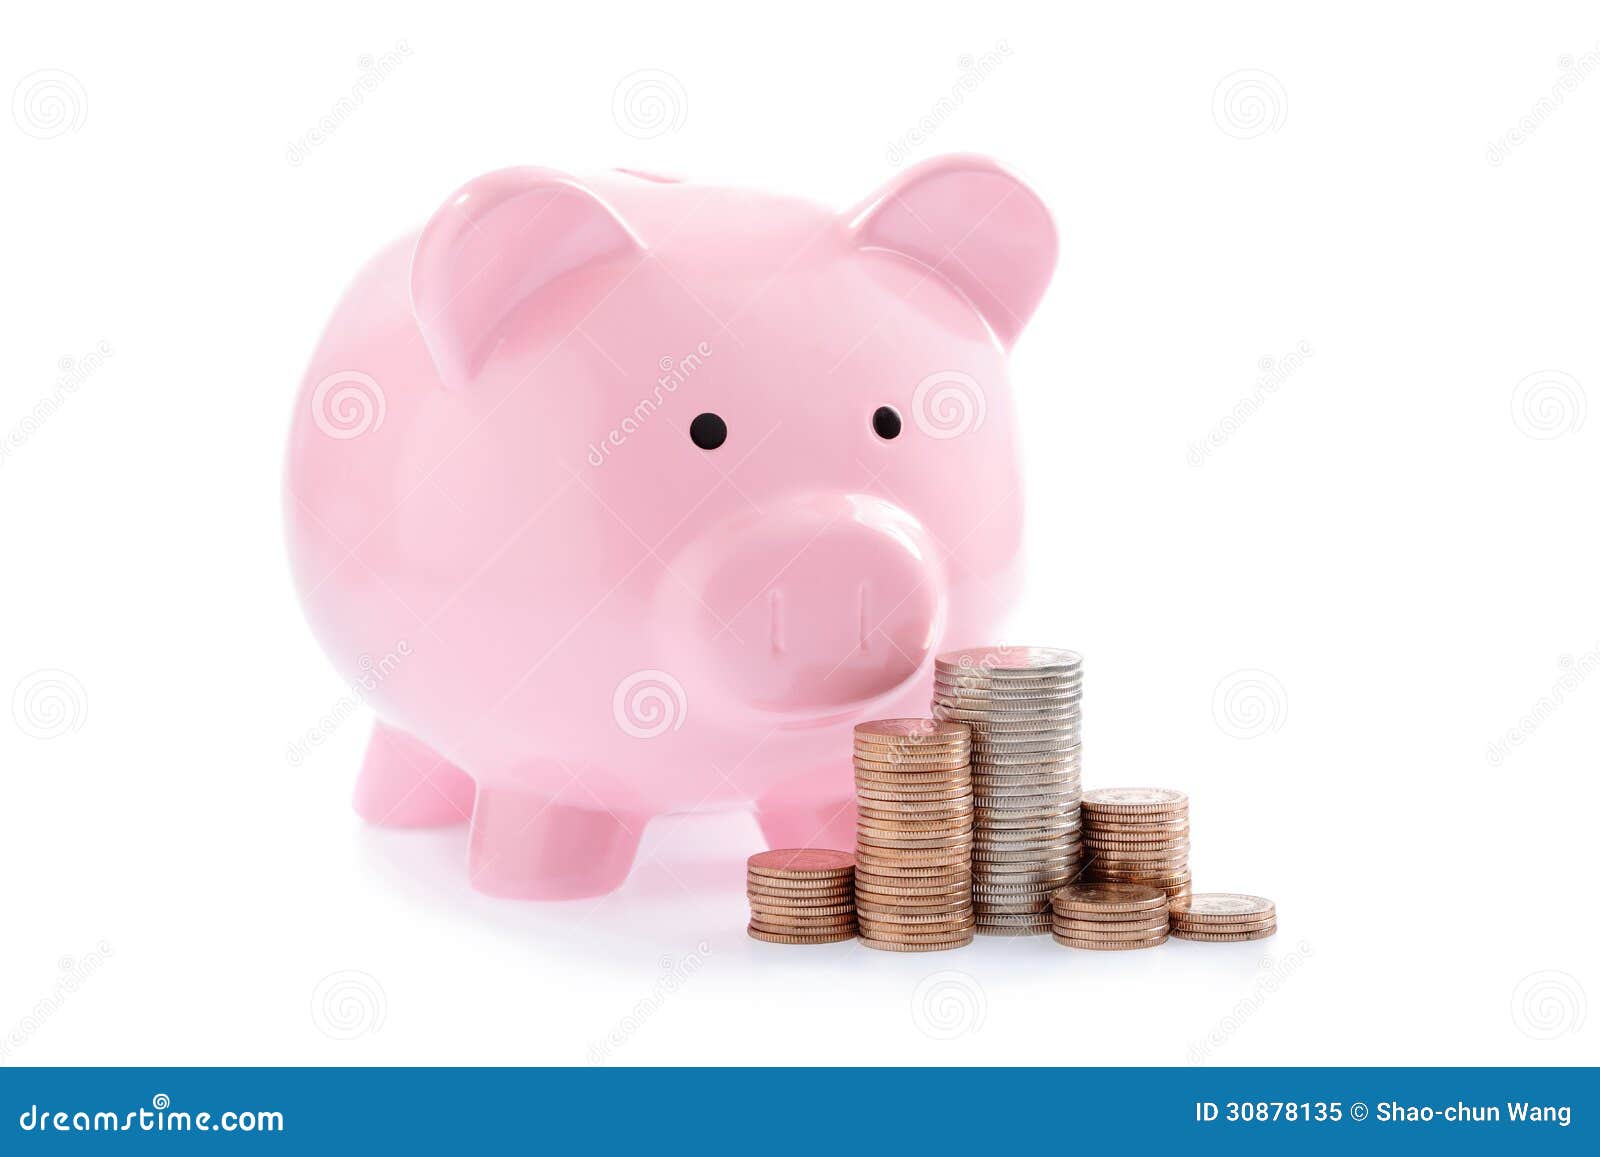 pink piggy bank and stacks of money coins